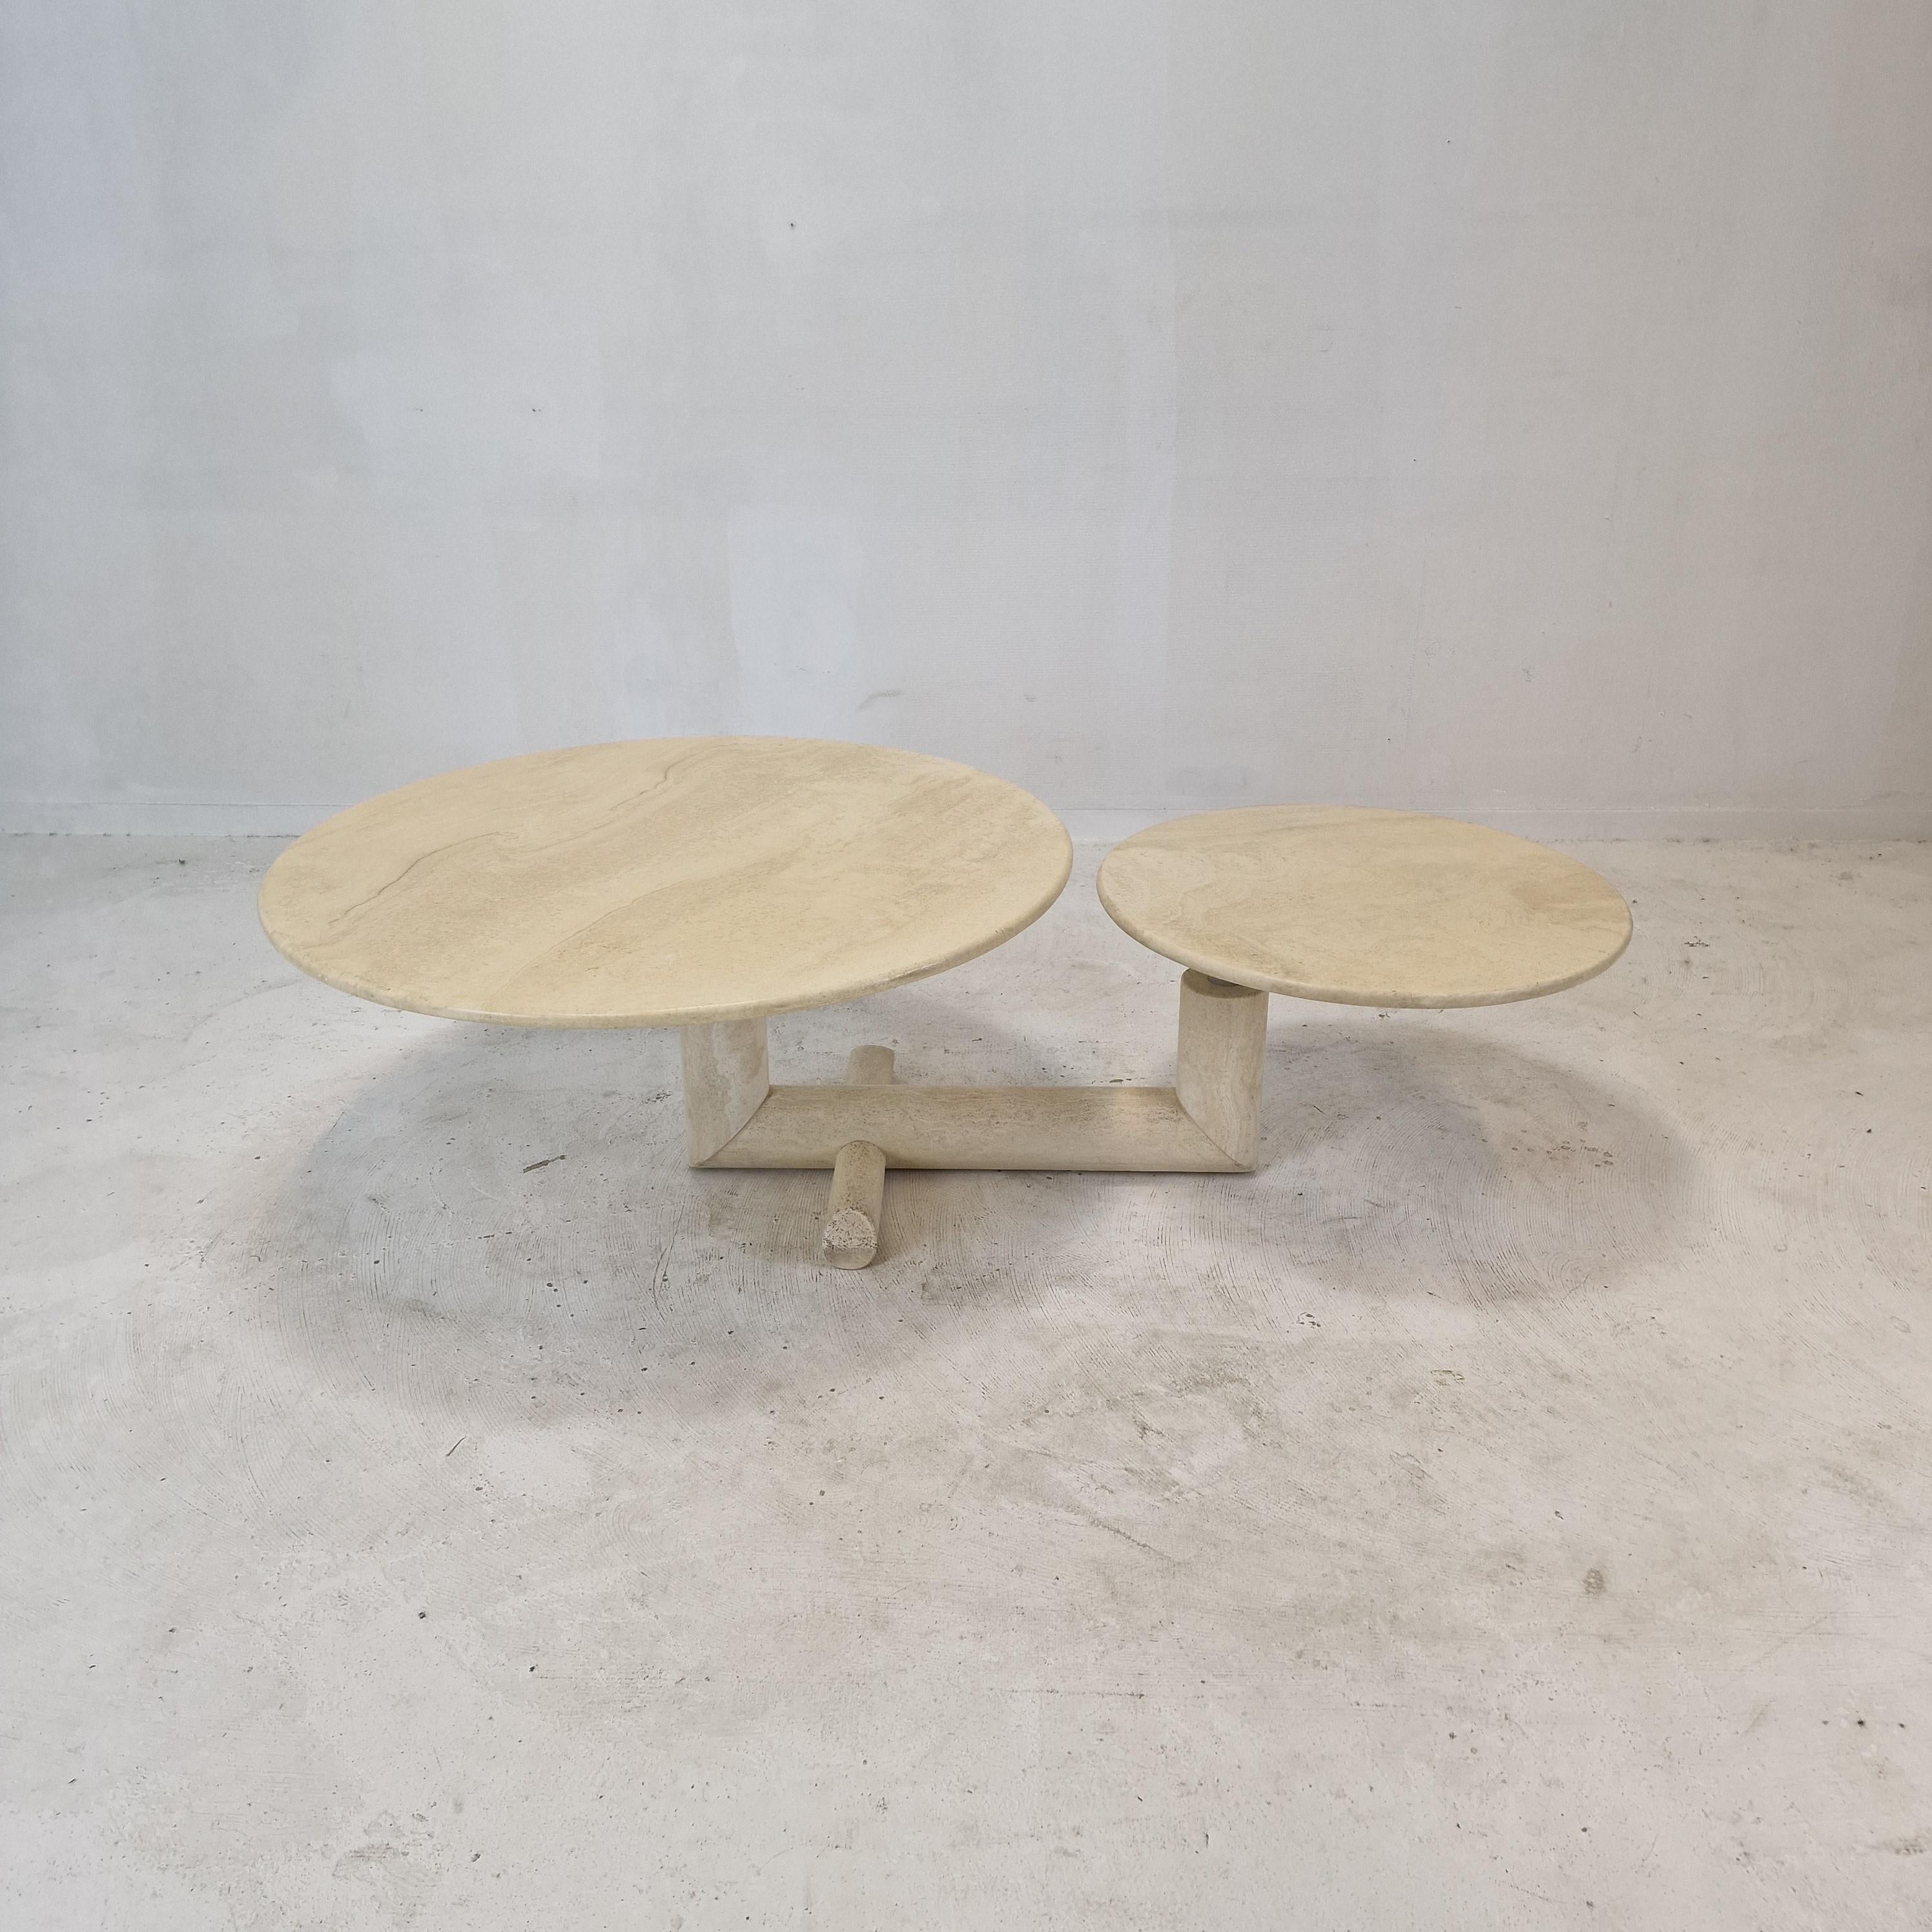 Lovely travertine coffee table, fabricated in Italy in the 80's. 

Two round plates on a very elegant base. 
The plates are turnable so you can vary the with (117 to 153 cm, 46 to 60.2 Inch) of the table (see the pictures). 

This rare table is